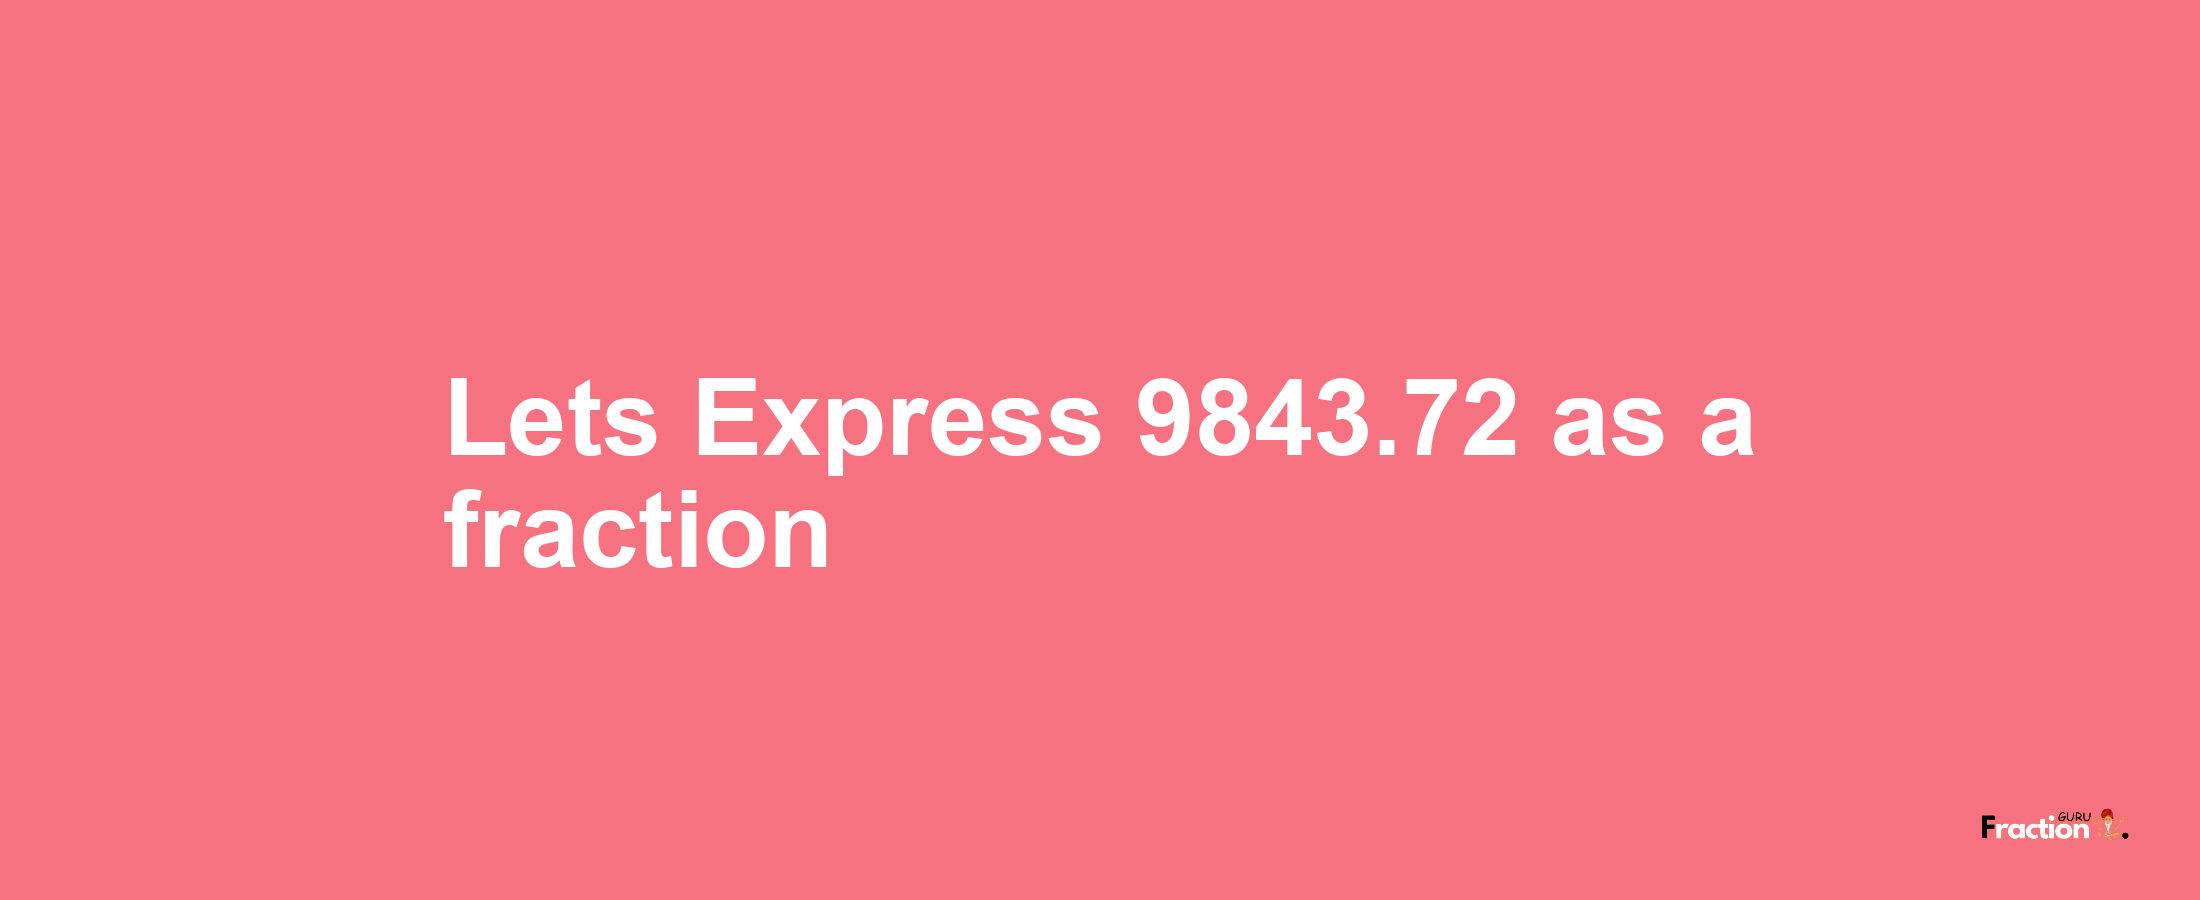 Lets Express 9843.72 as afraction